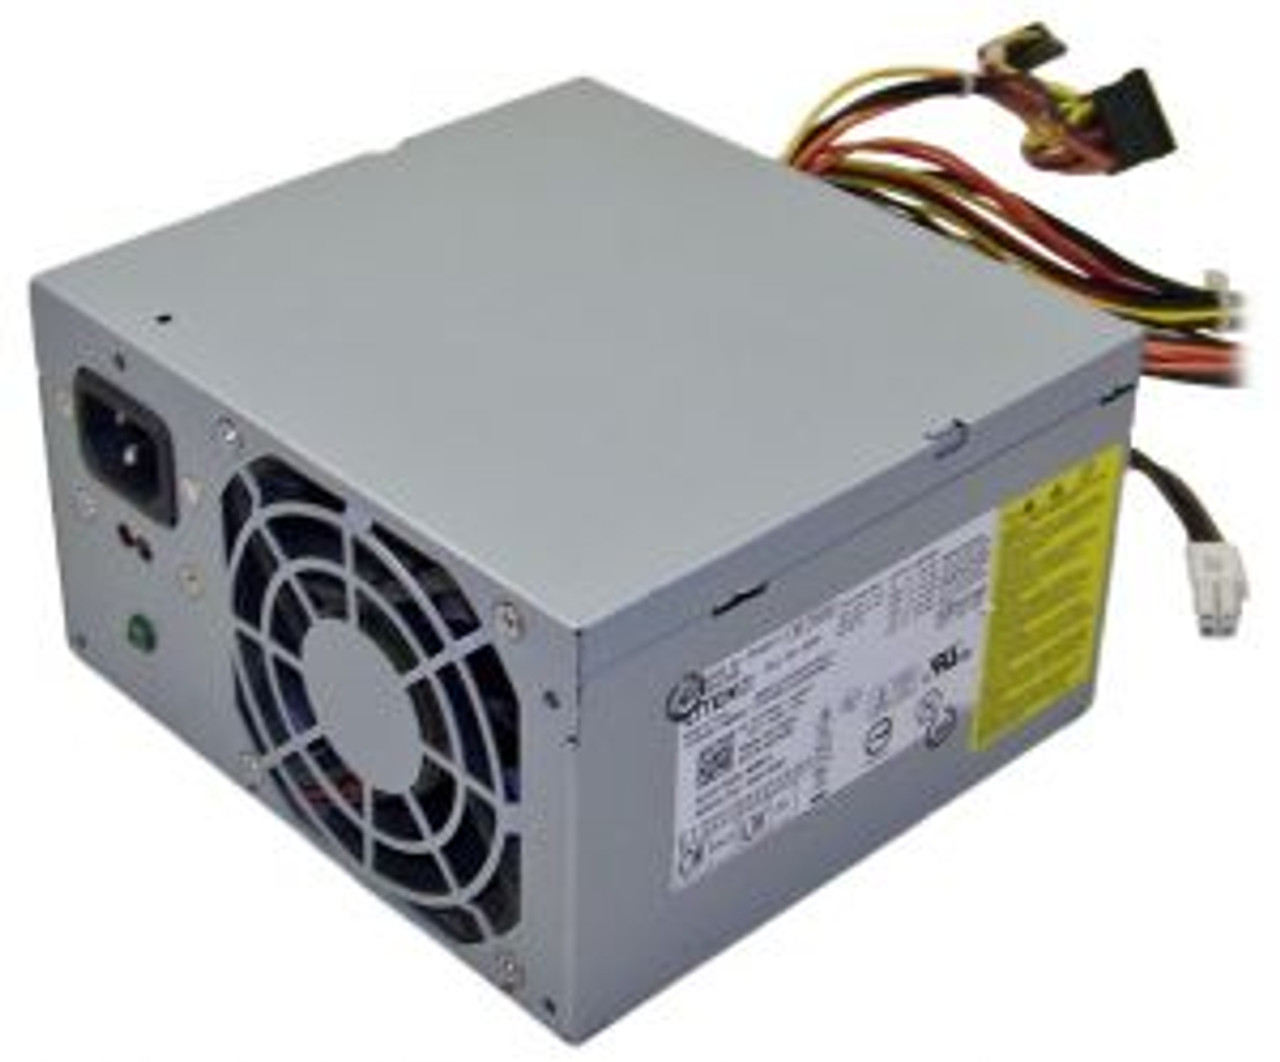 PA-4221-3D2 Dell 224-Watts Power Supply